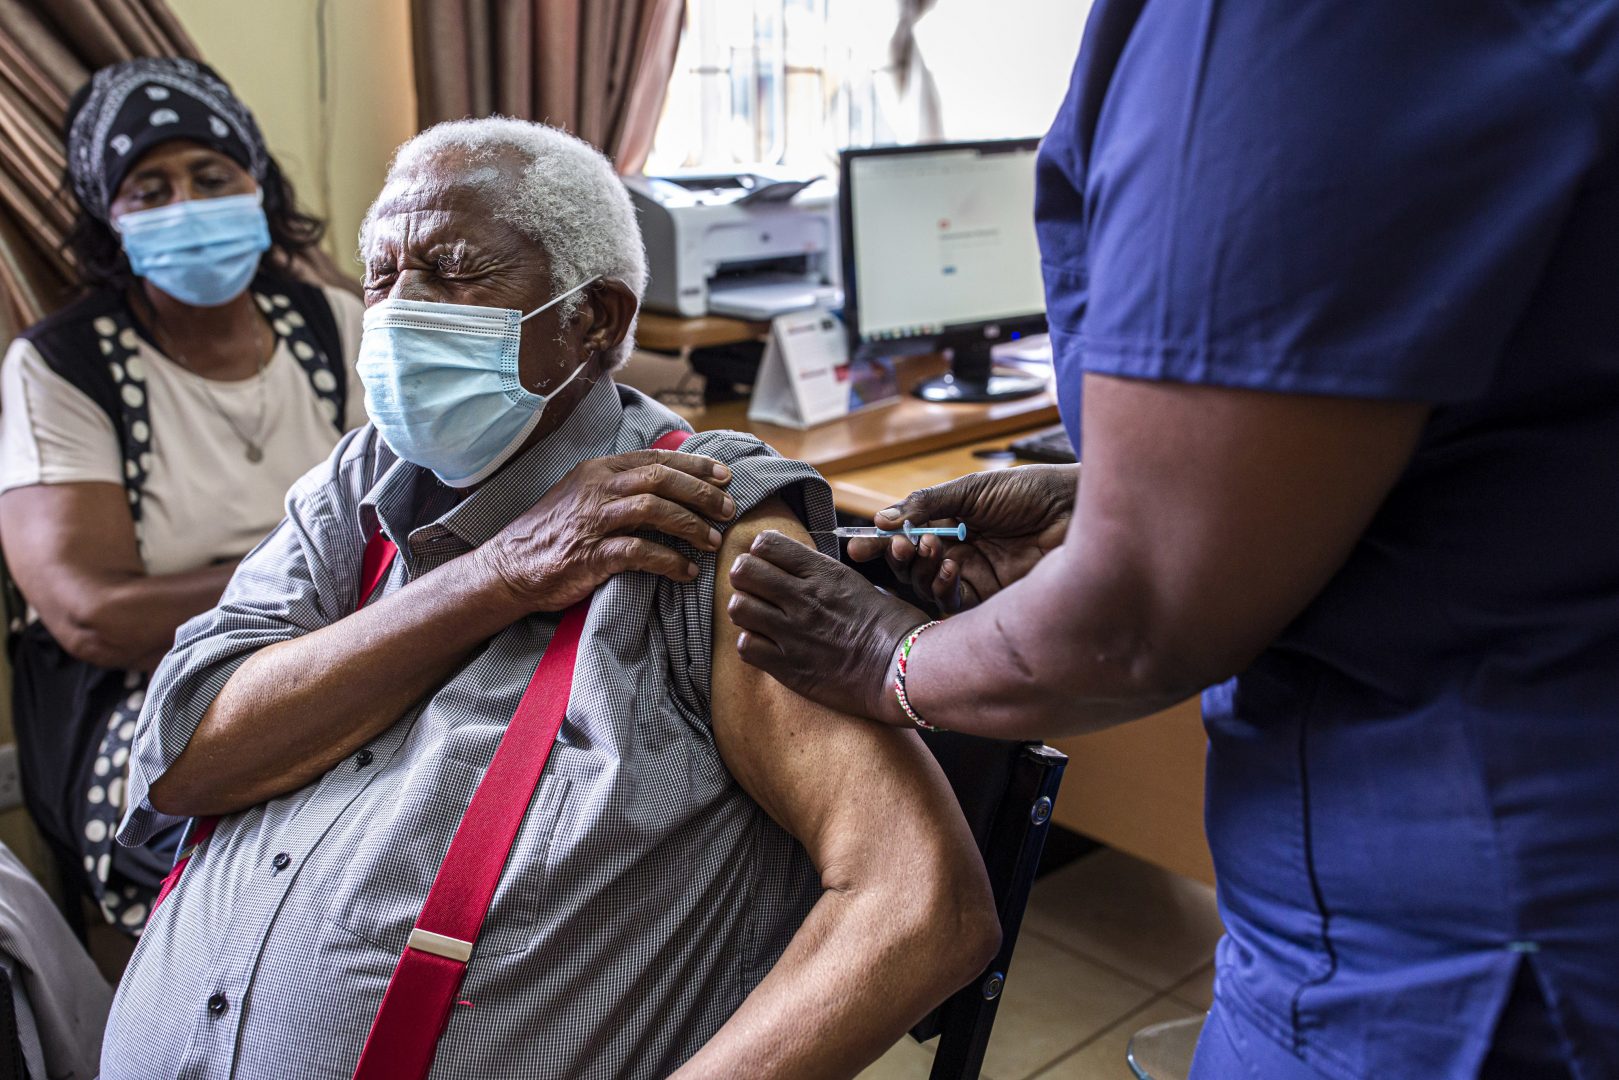 An elderly resident receives a dose of the Covishield Covid-19 vaccine, developed by AstraZeneca Plc and the University of Oxford and manufactured by Serum Institute of India Ltd., at Thika Level 5 Hospital in Thika, Kenya, on Tuesday, March 30, 2021. Kenyan hospitals are grappling with record numbers of critical-care patients, stretching a system that was inadequate even before the outbreak of Covid-19. Photographer: Patrick Meinhardt/Bloomberg via Getty Images